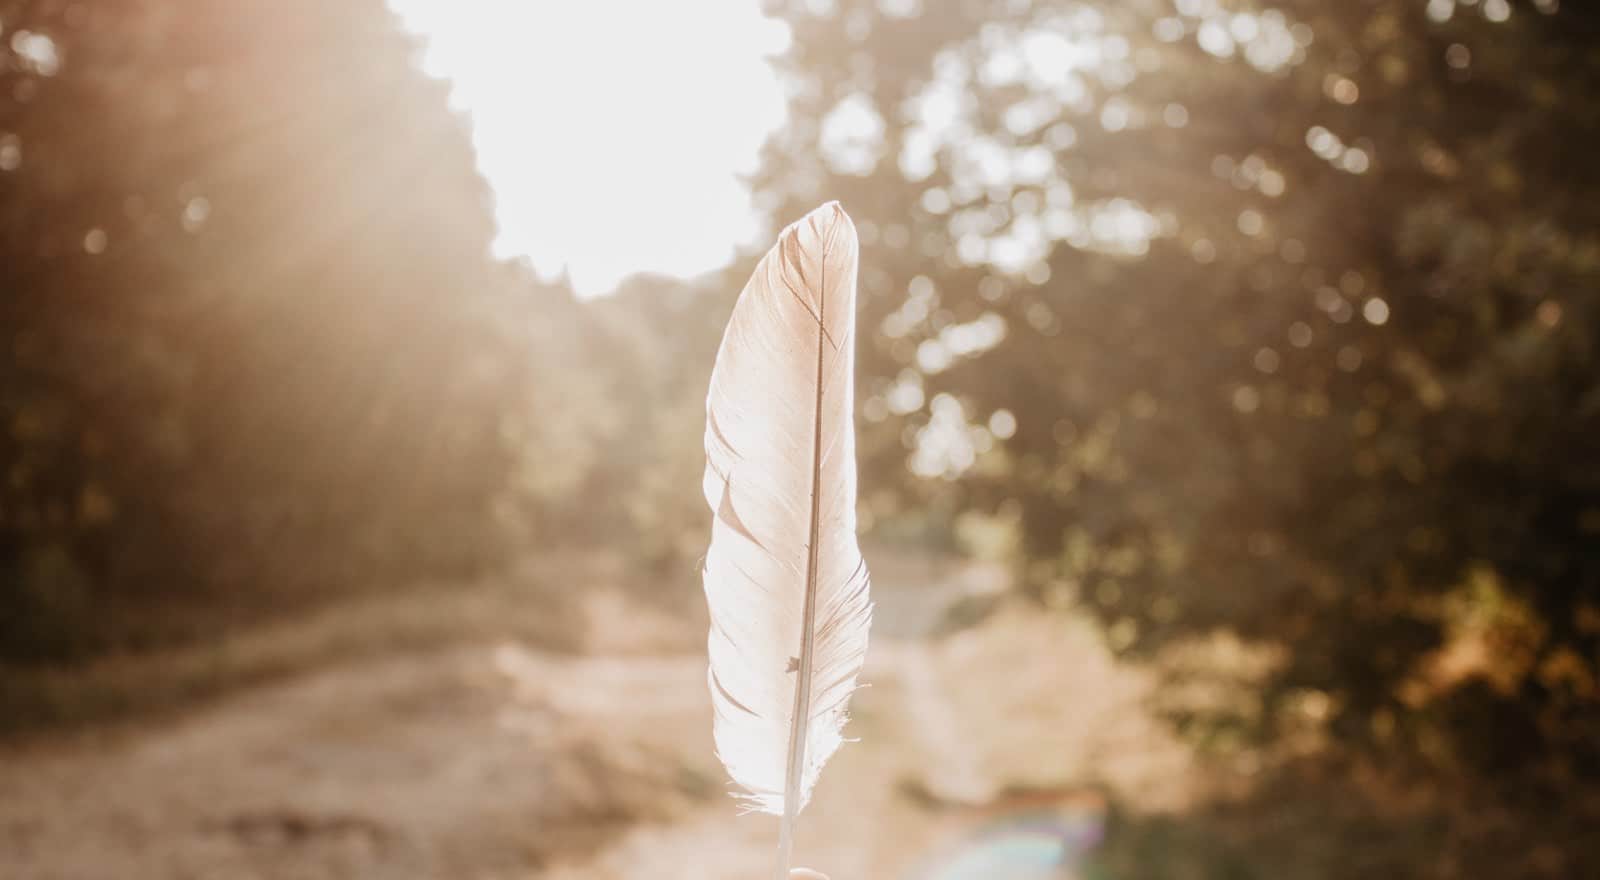 The Spiritual Meaning and Symbolism of Brown and White Feathers